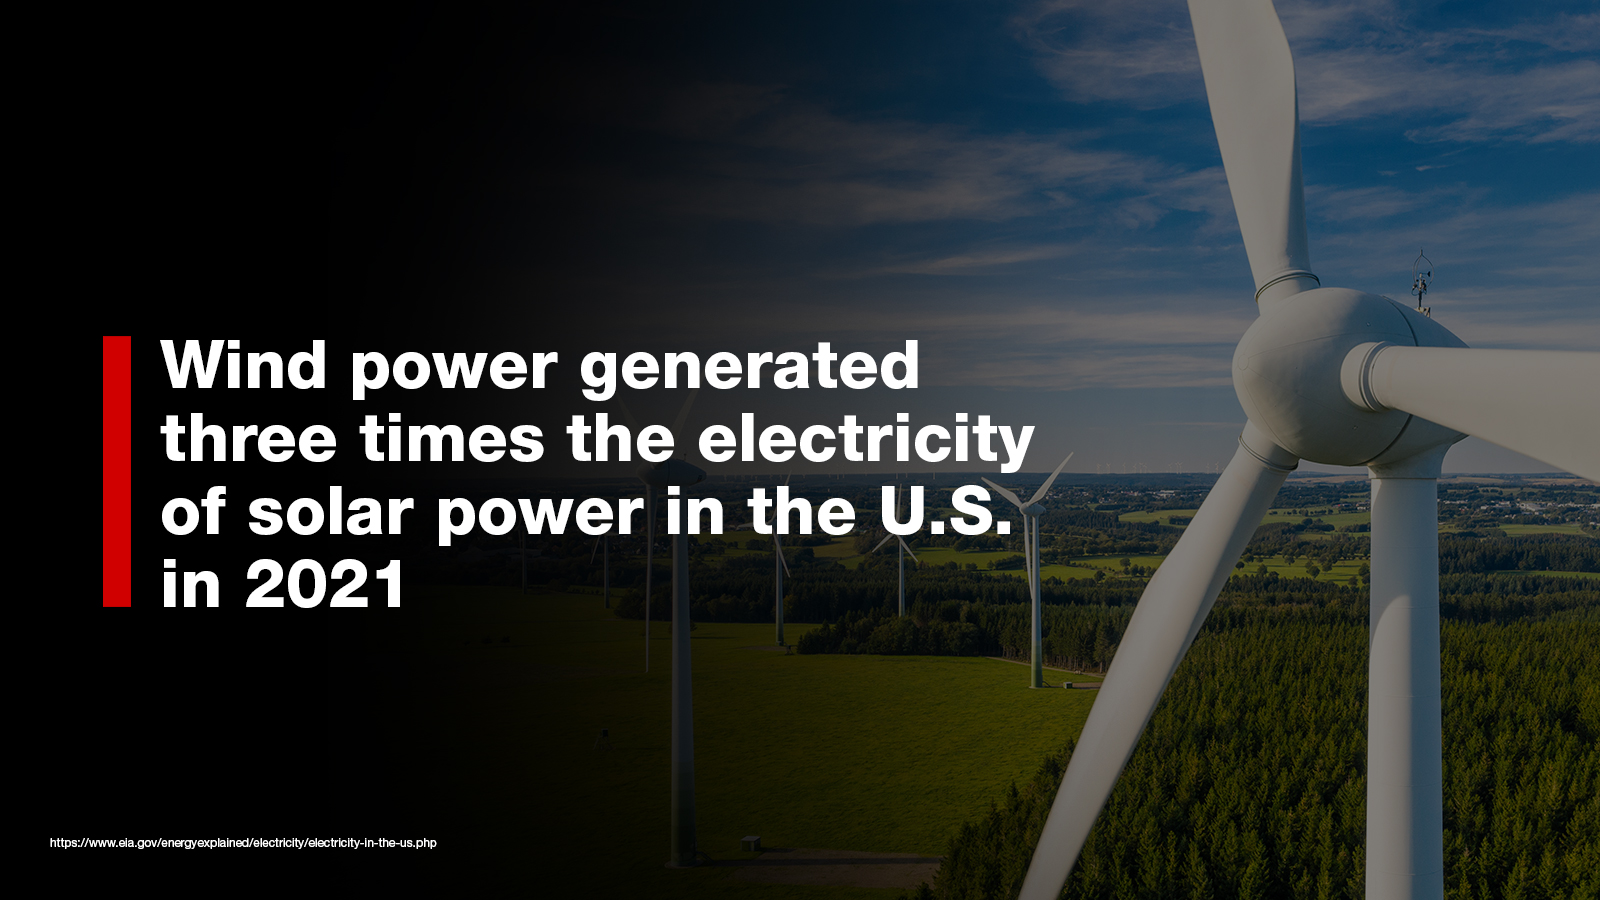 Wind power generated 3 times the electricity of solar power in the U.S. in 2021